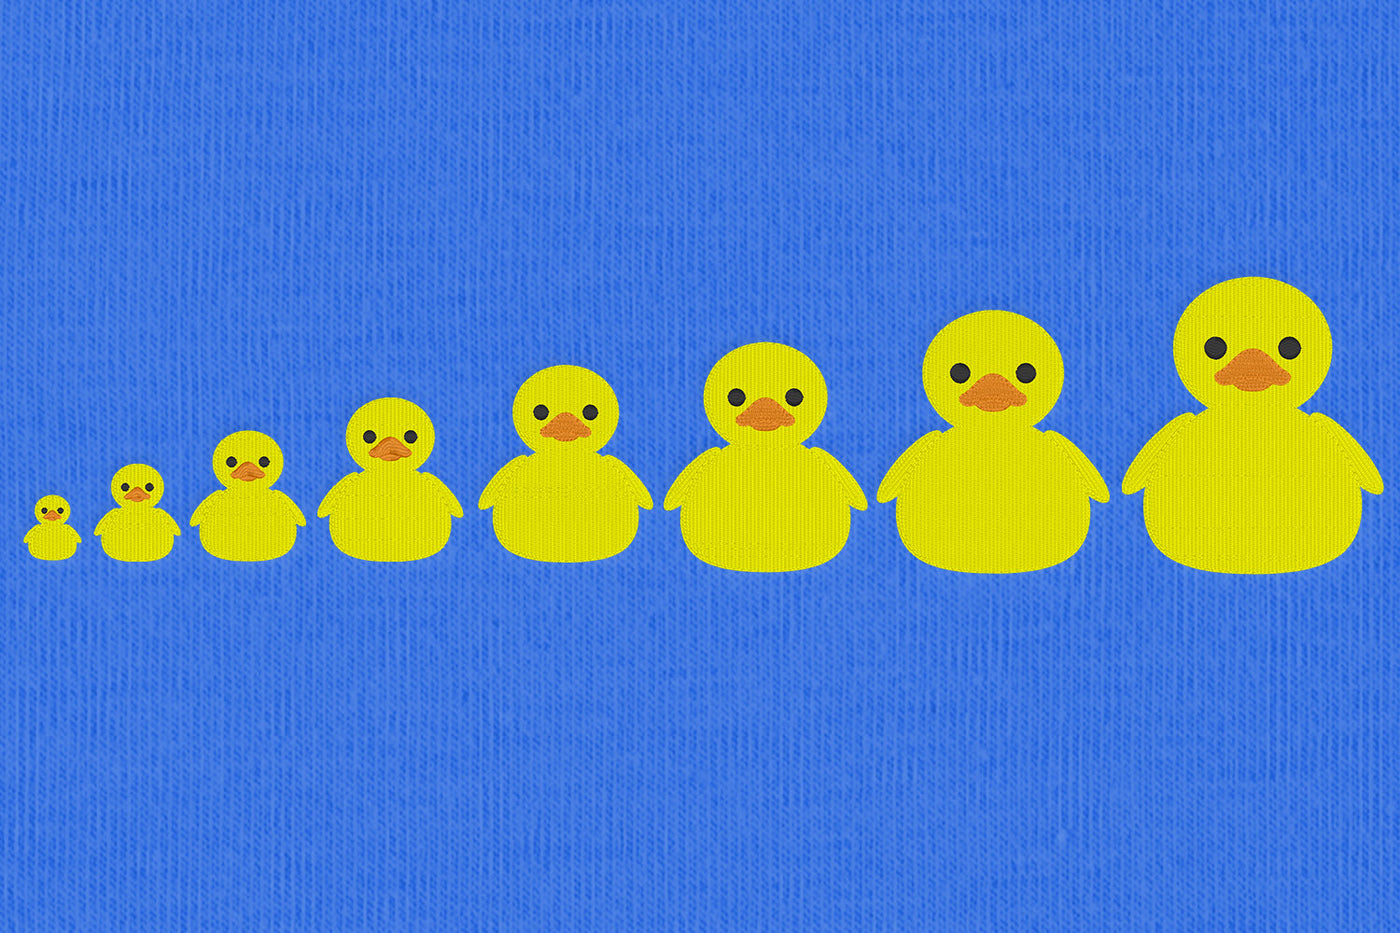 Rubber duck mini embroidery in 8 sizes